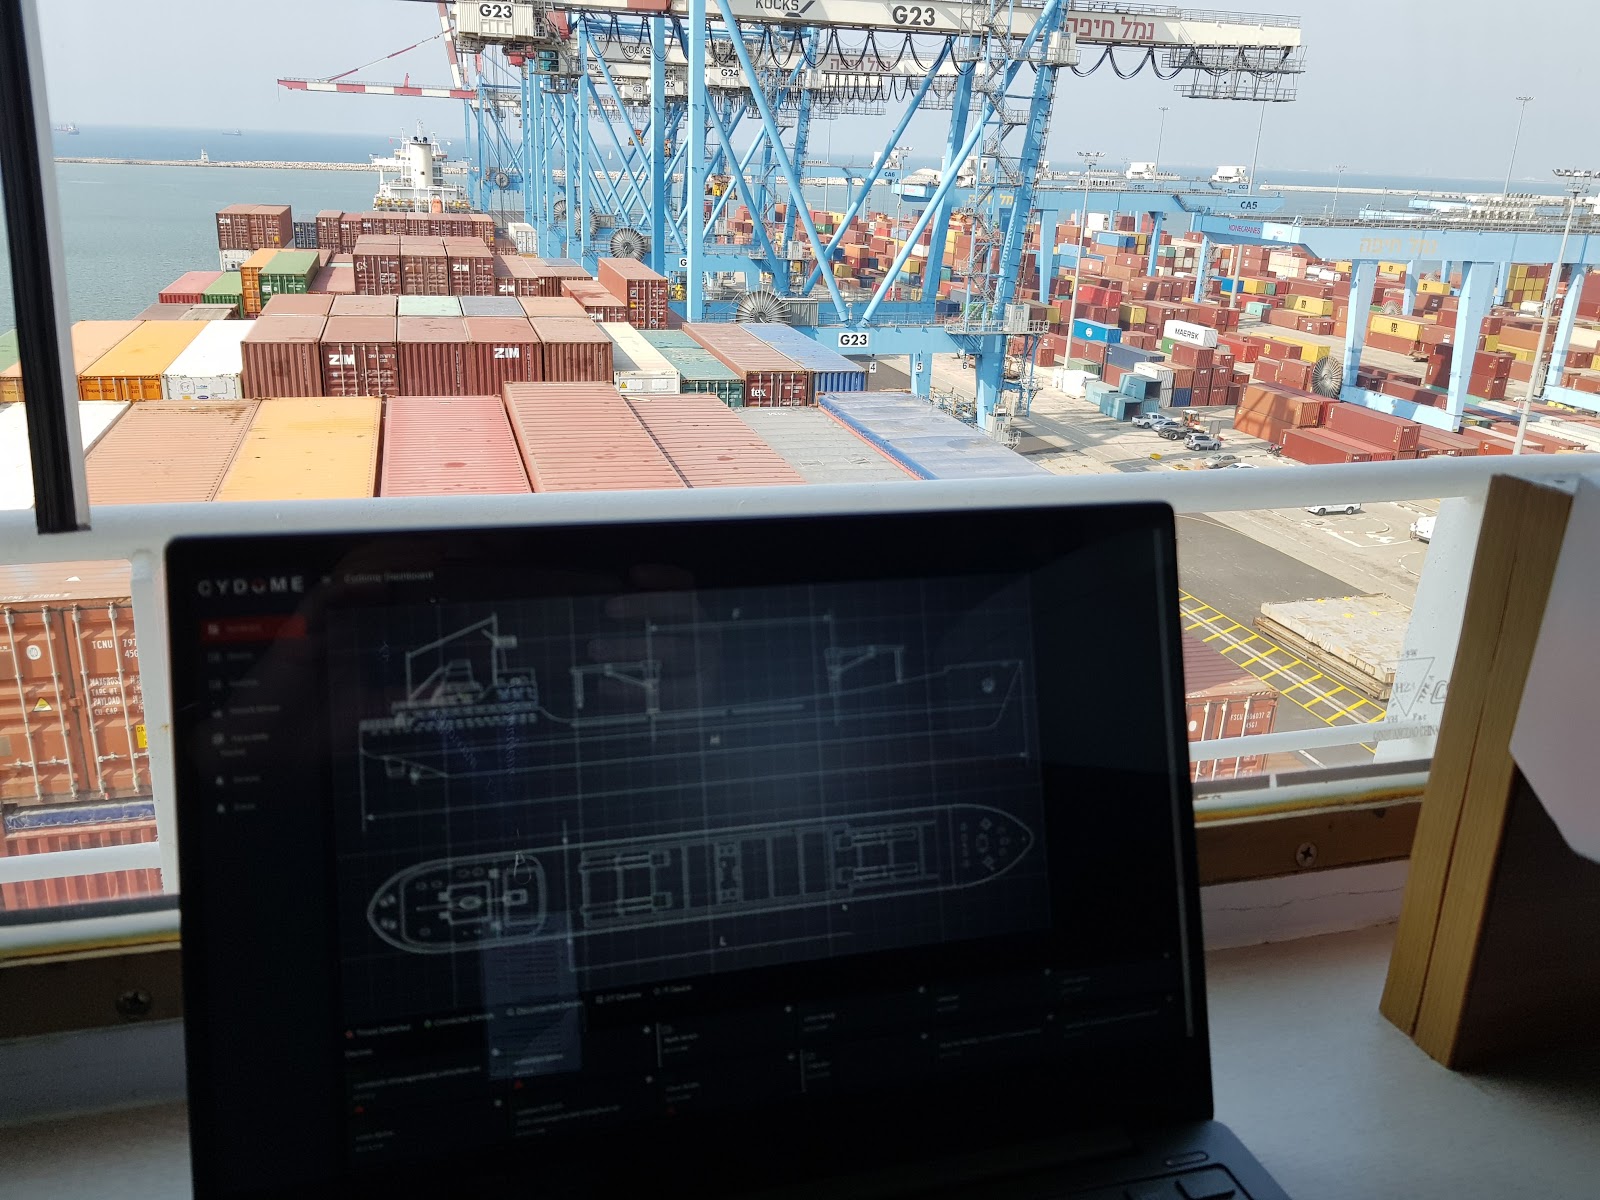 Israeli Startup Helps Protect Ships from Cyber Pirates